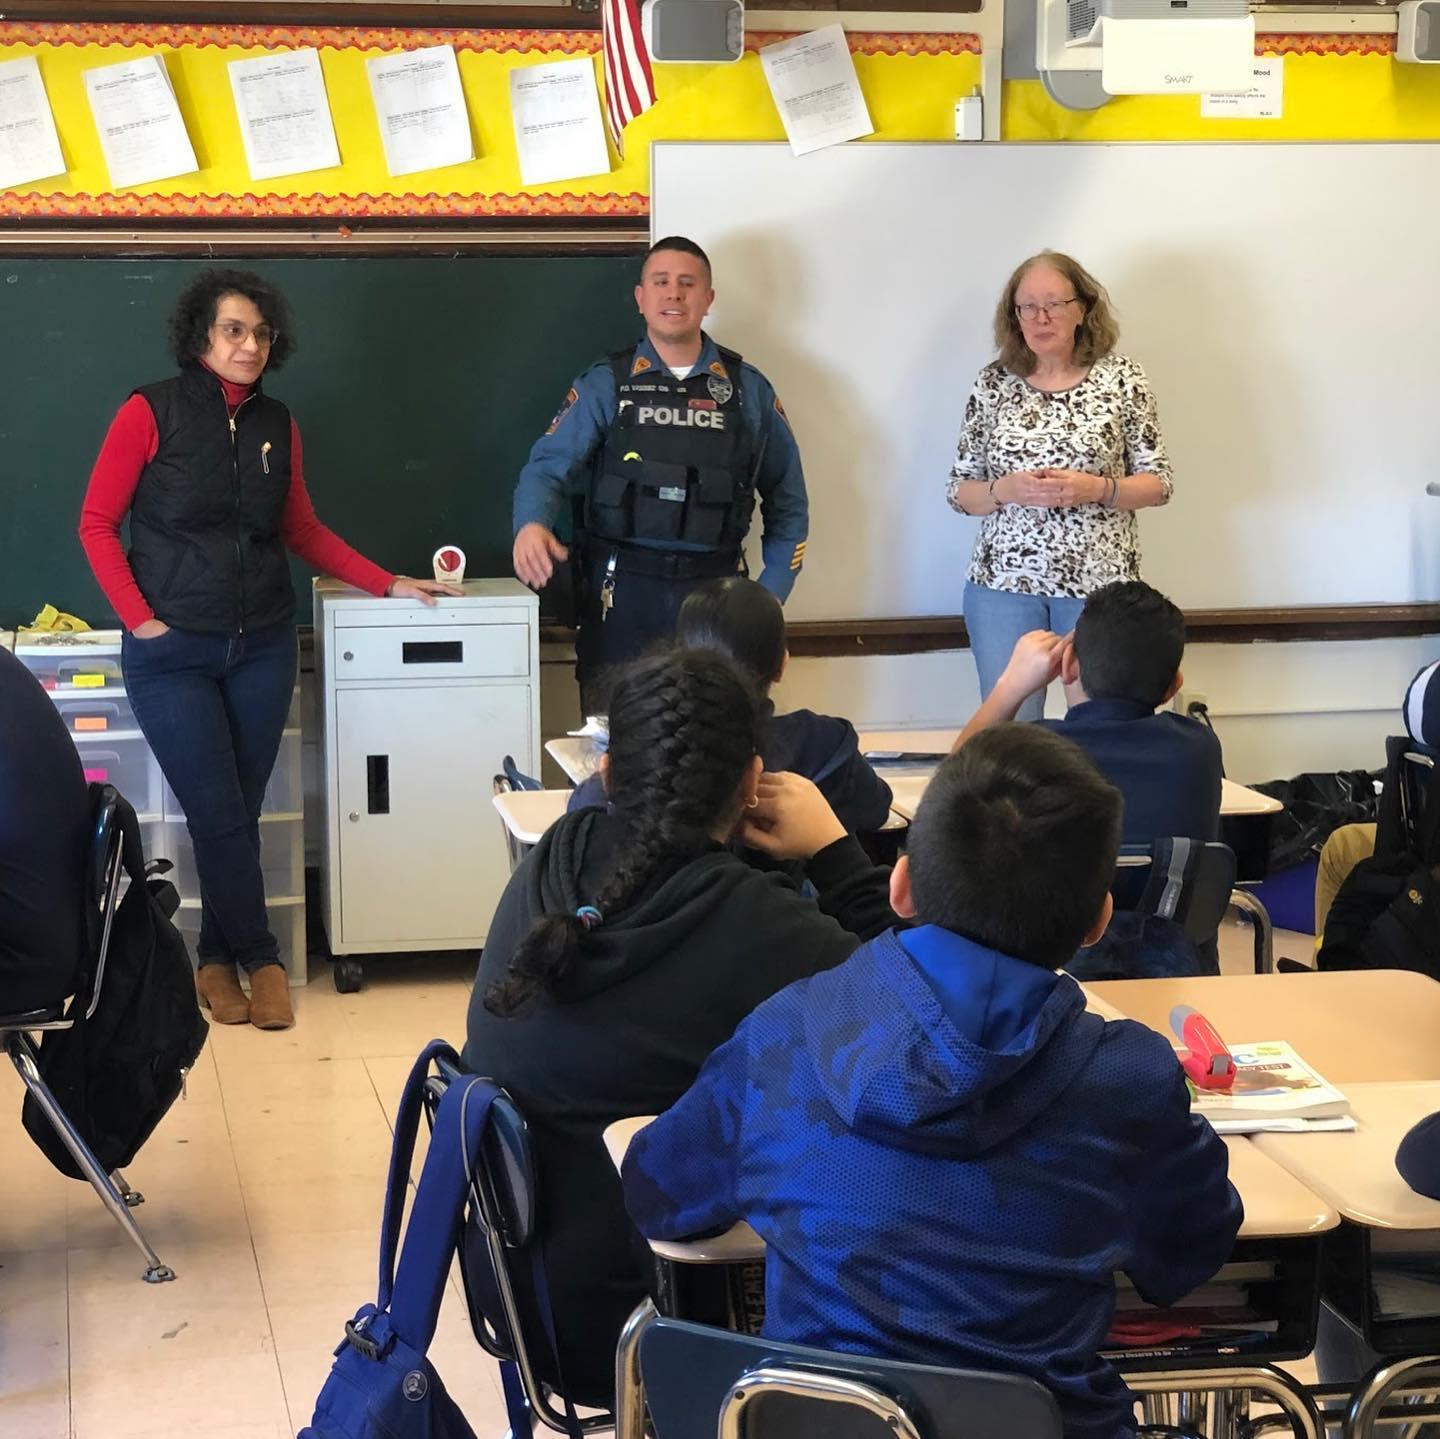 Mrs. Del Gaudio, Officer Vasquez, & Principal O'Connell talking to room 302 students